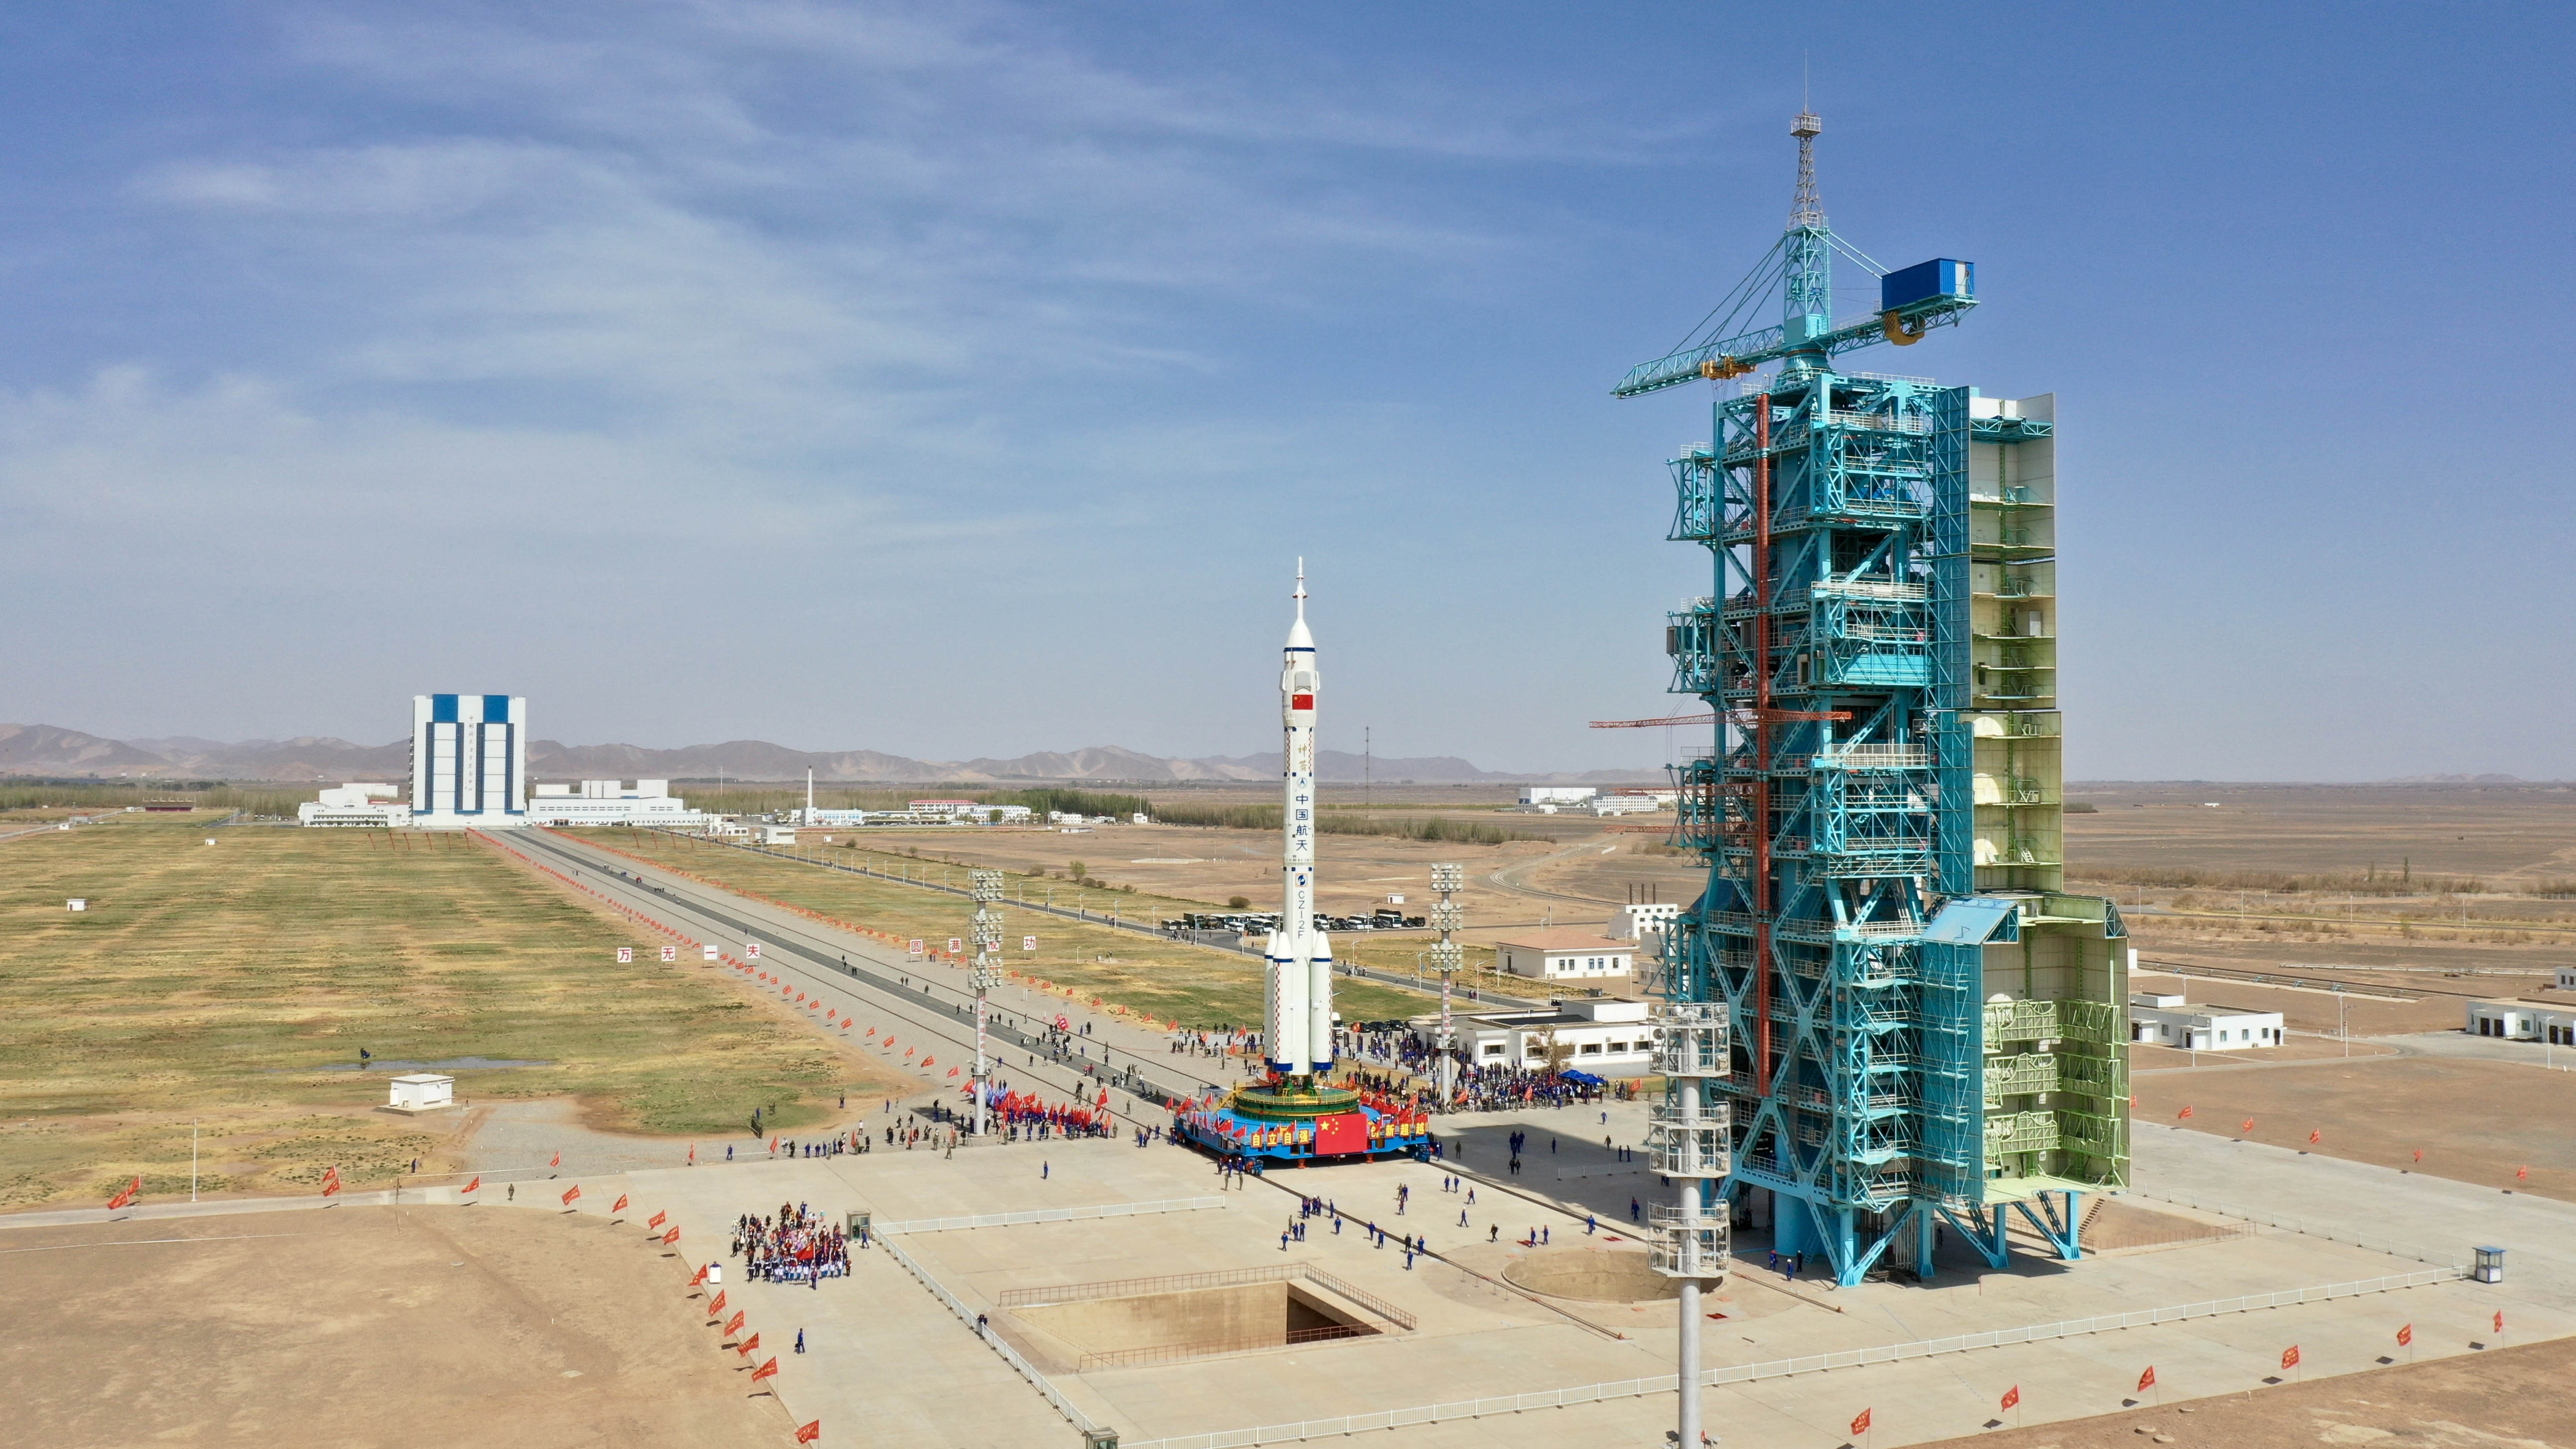 Live: A closer look at Shenzhou-18 manned space mission's launch site